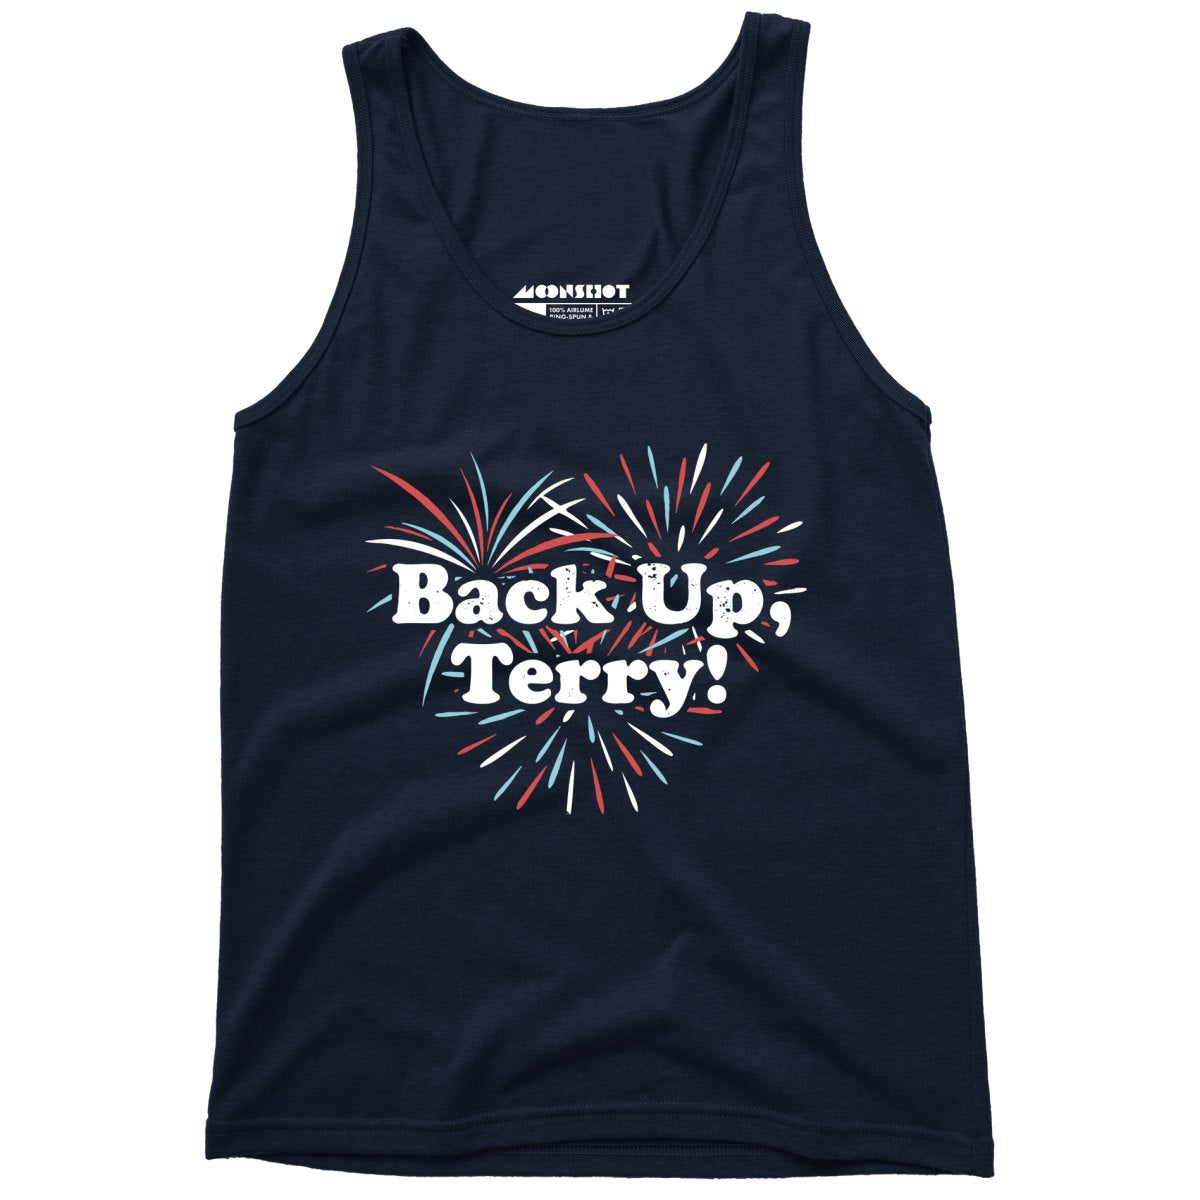 Back Up, Terry! - Unisex Tank Top